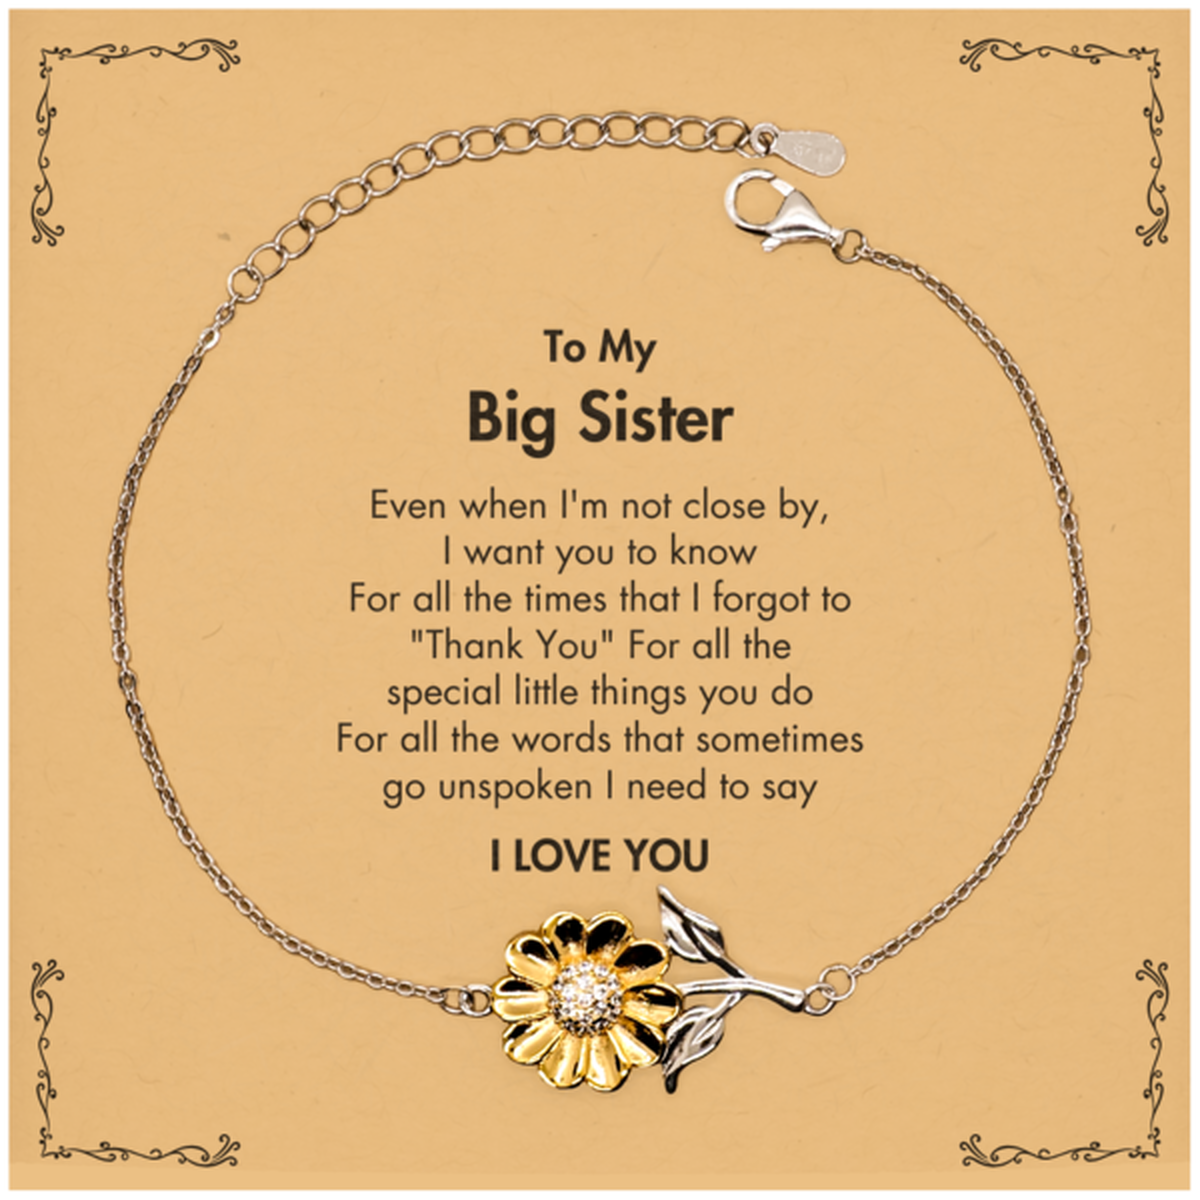 Thank You Gifts for Big Sister, Keepsake Sunflower Bracelet Gifts for Big Sister Birthday Mother's day Father's Day Big Sister For all the words That sometimes go unspoken I need to say I LOVE YOU